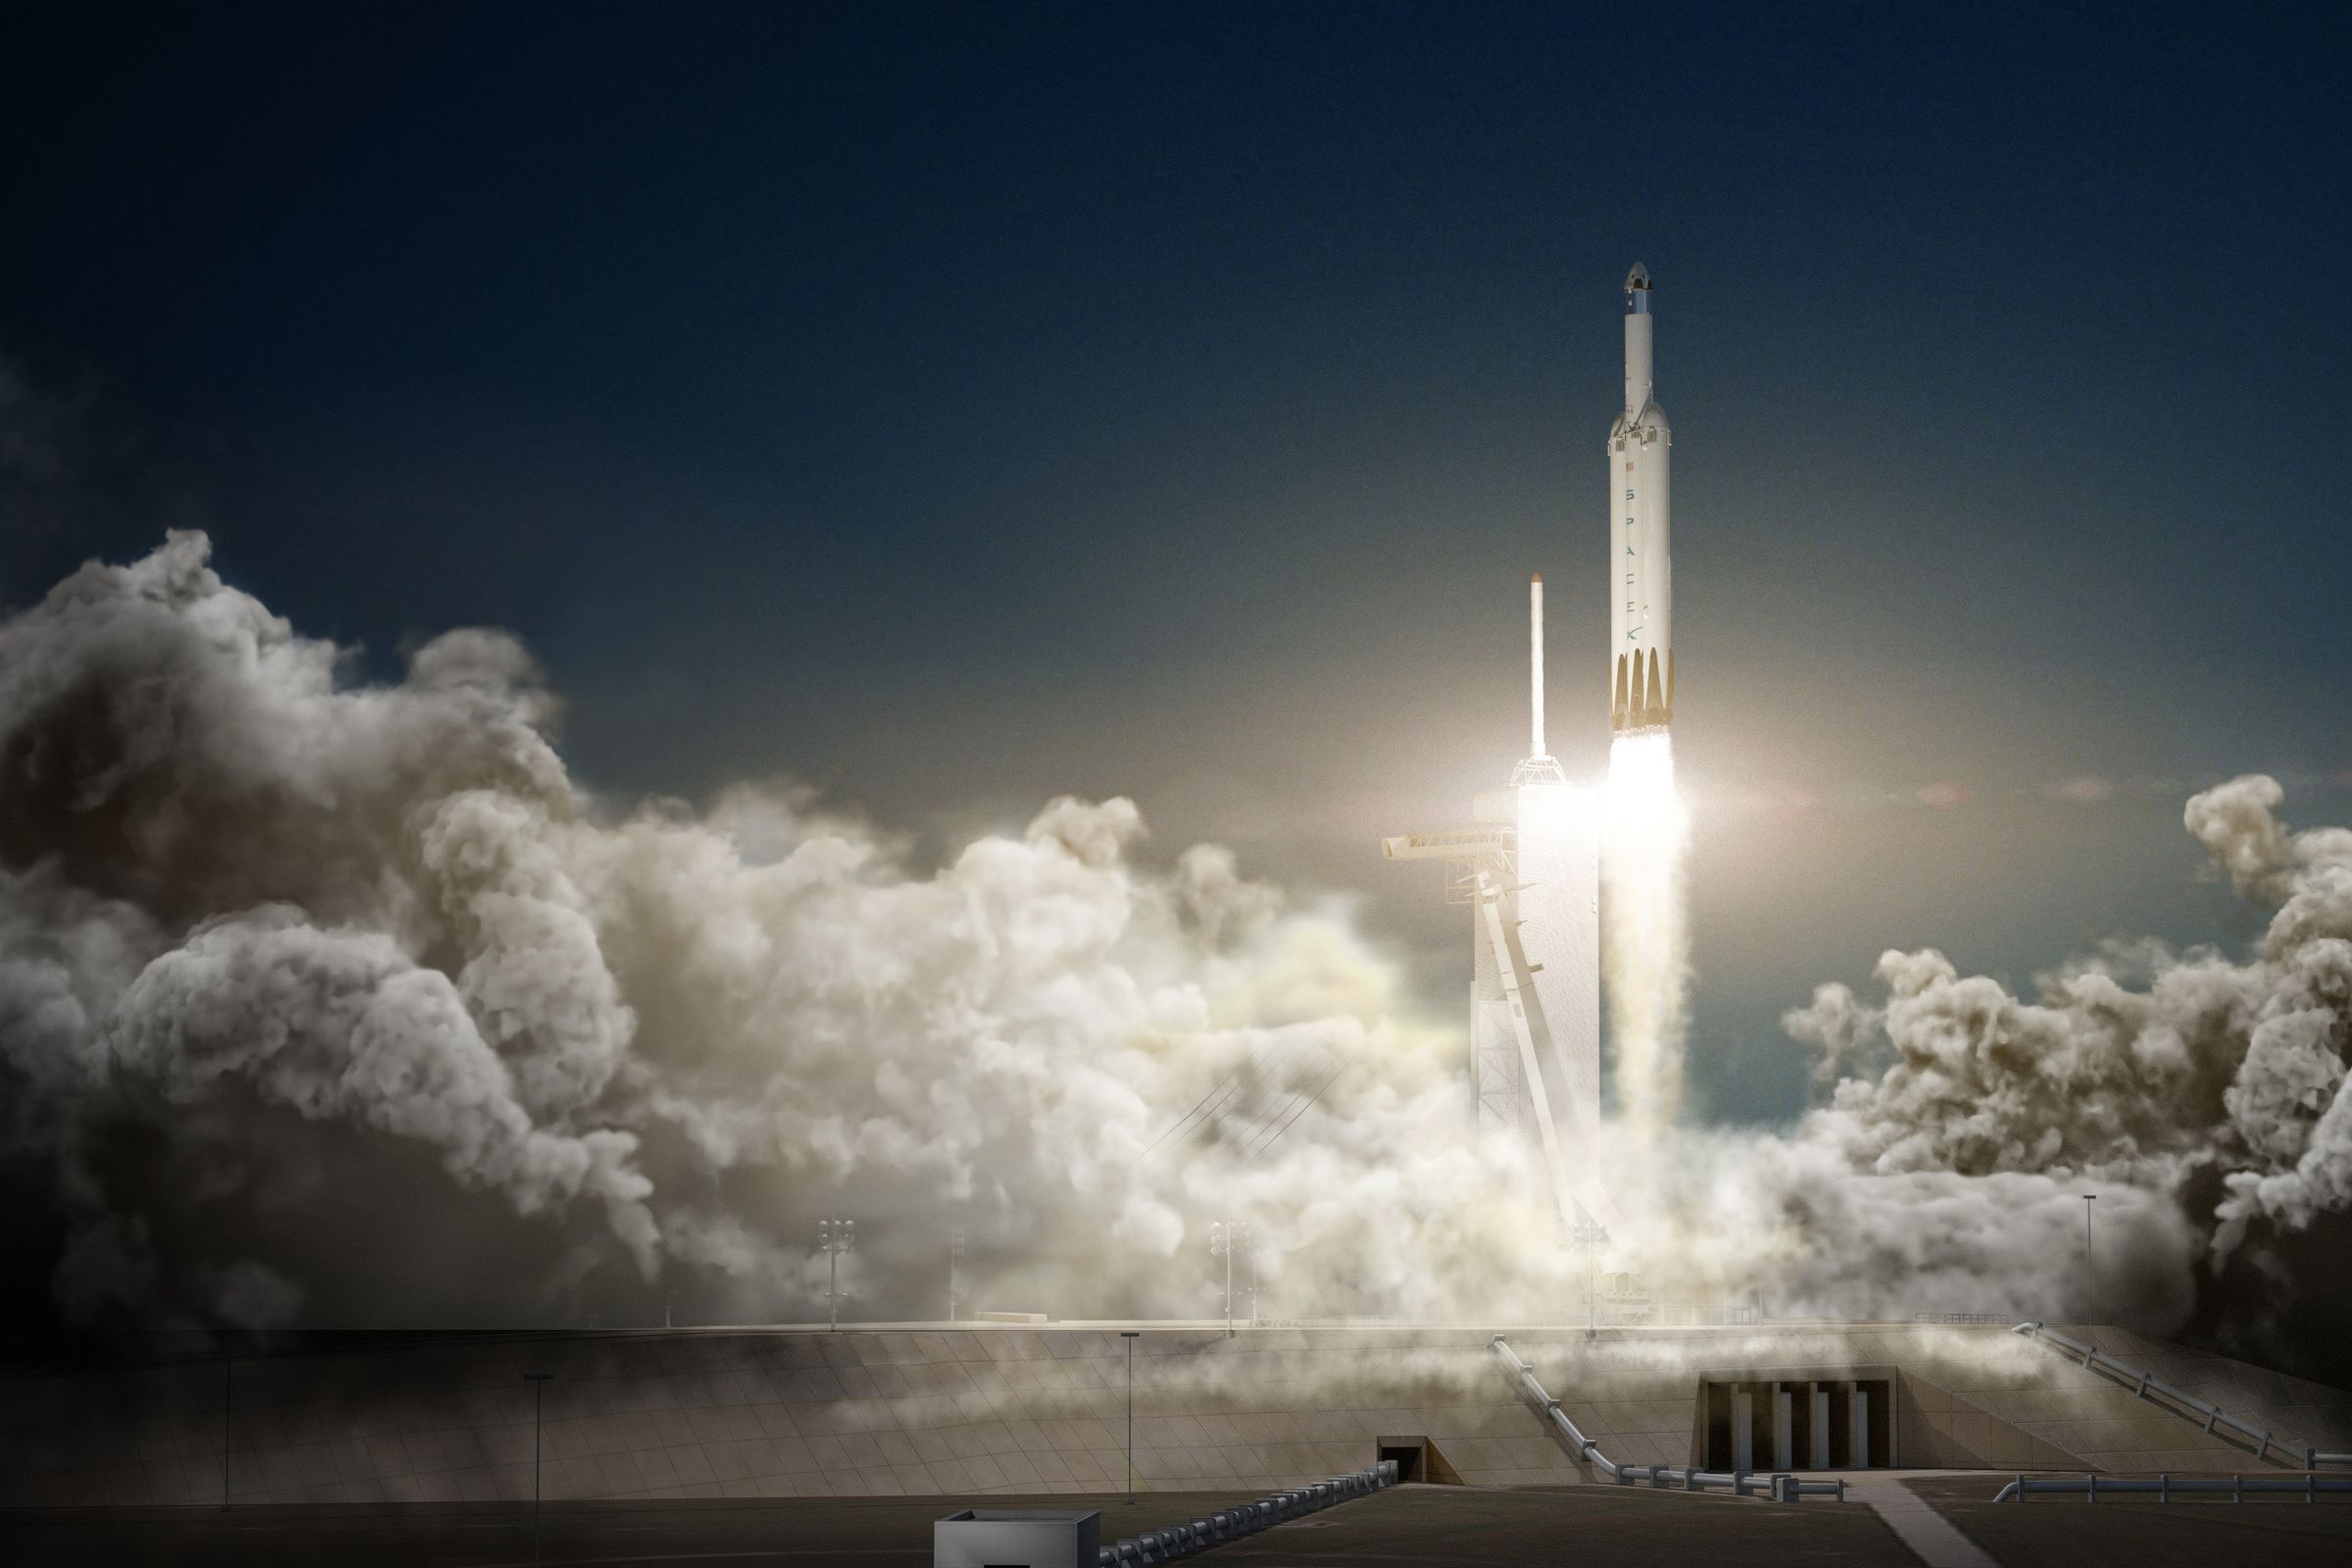 A rendering of the Falcon Heavy